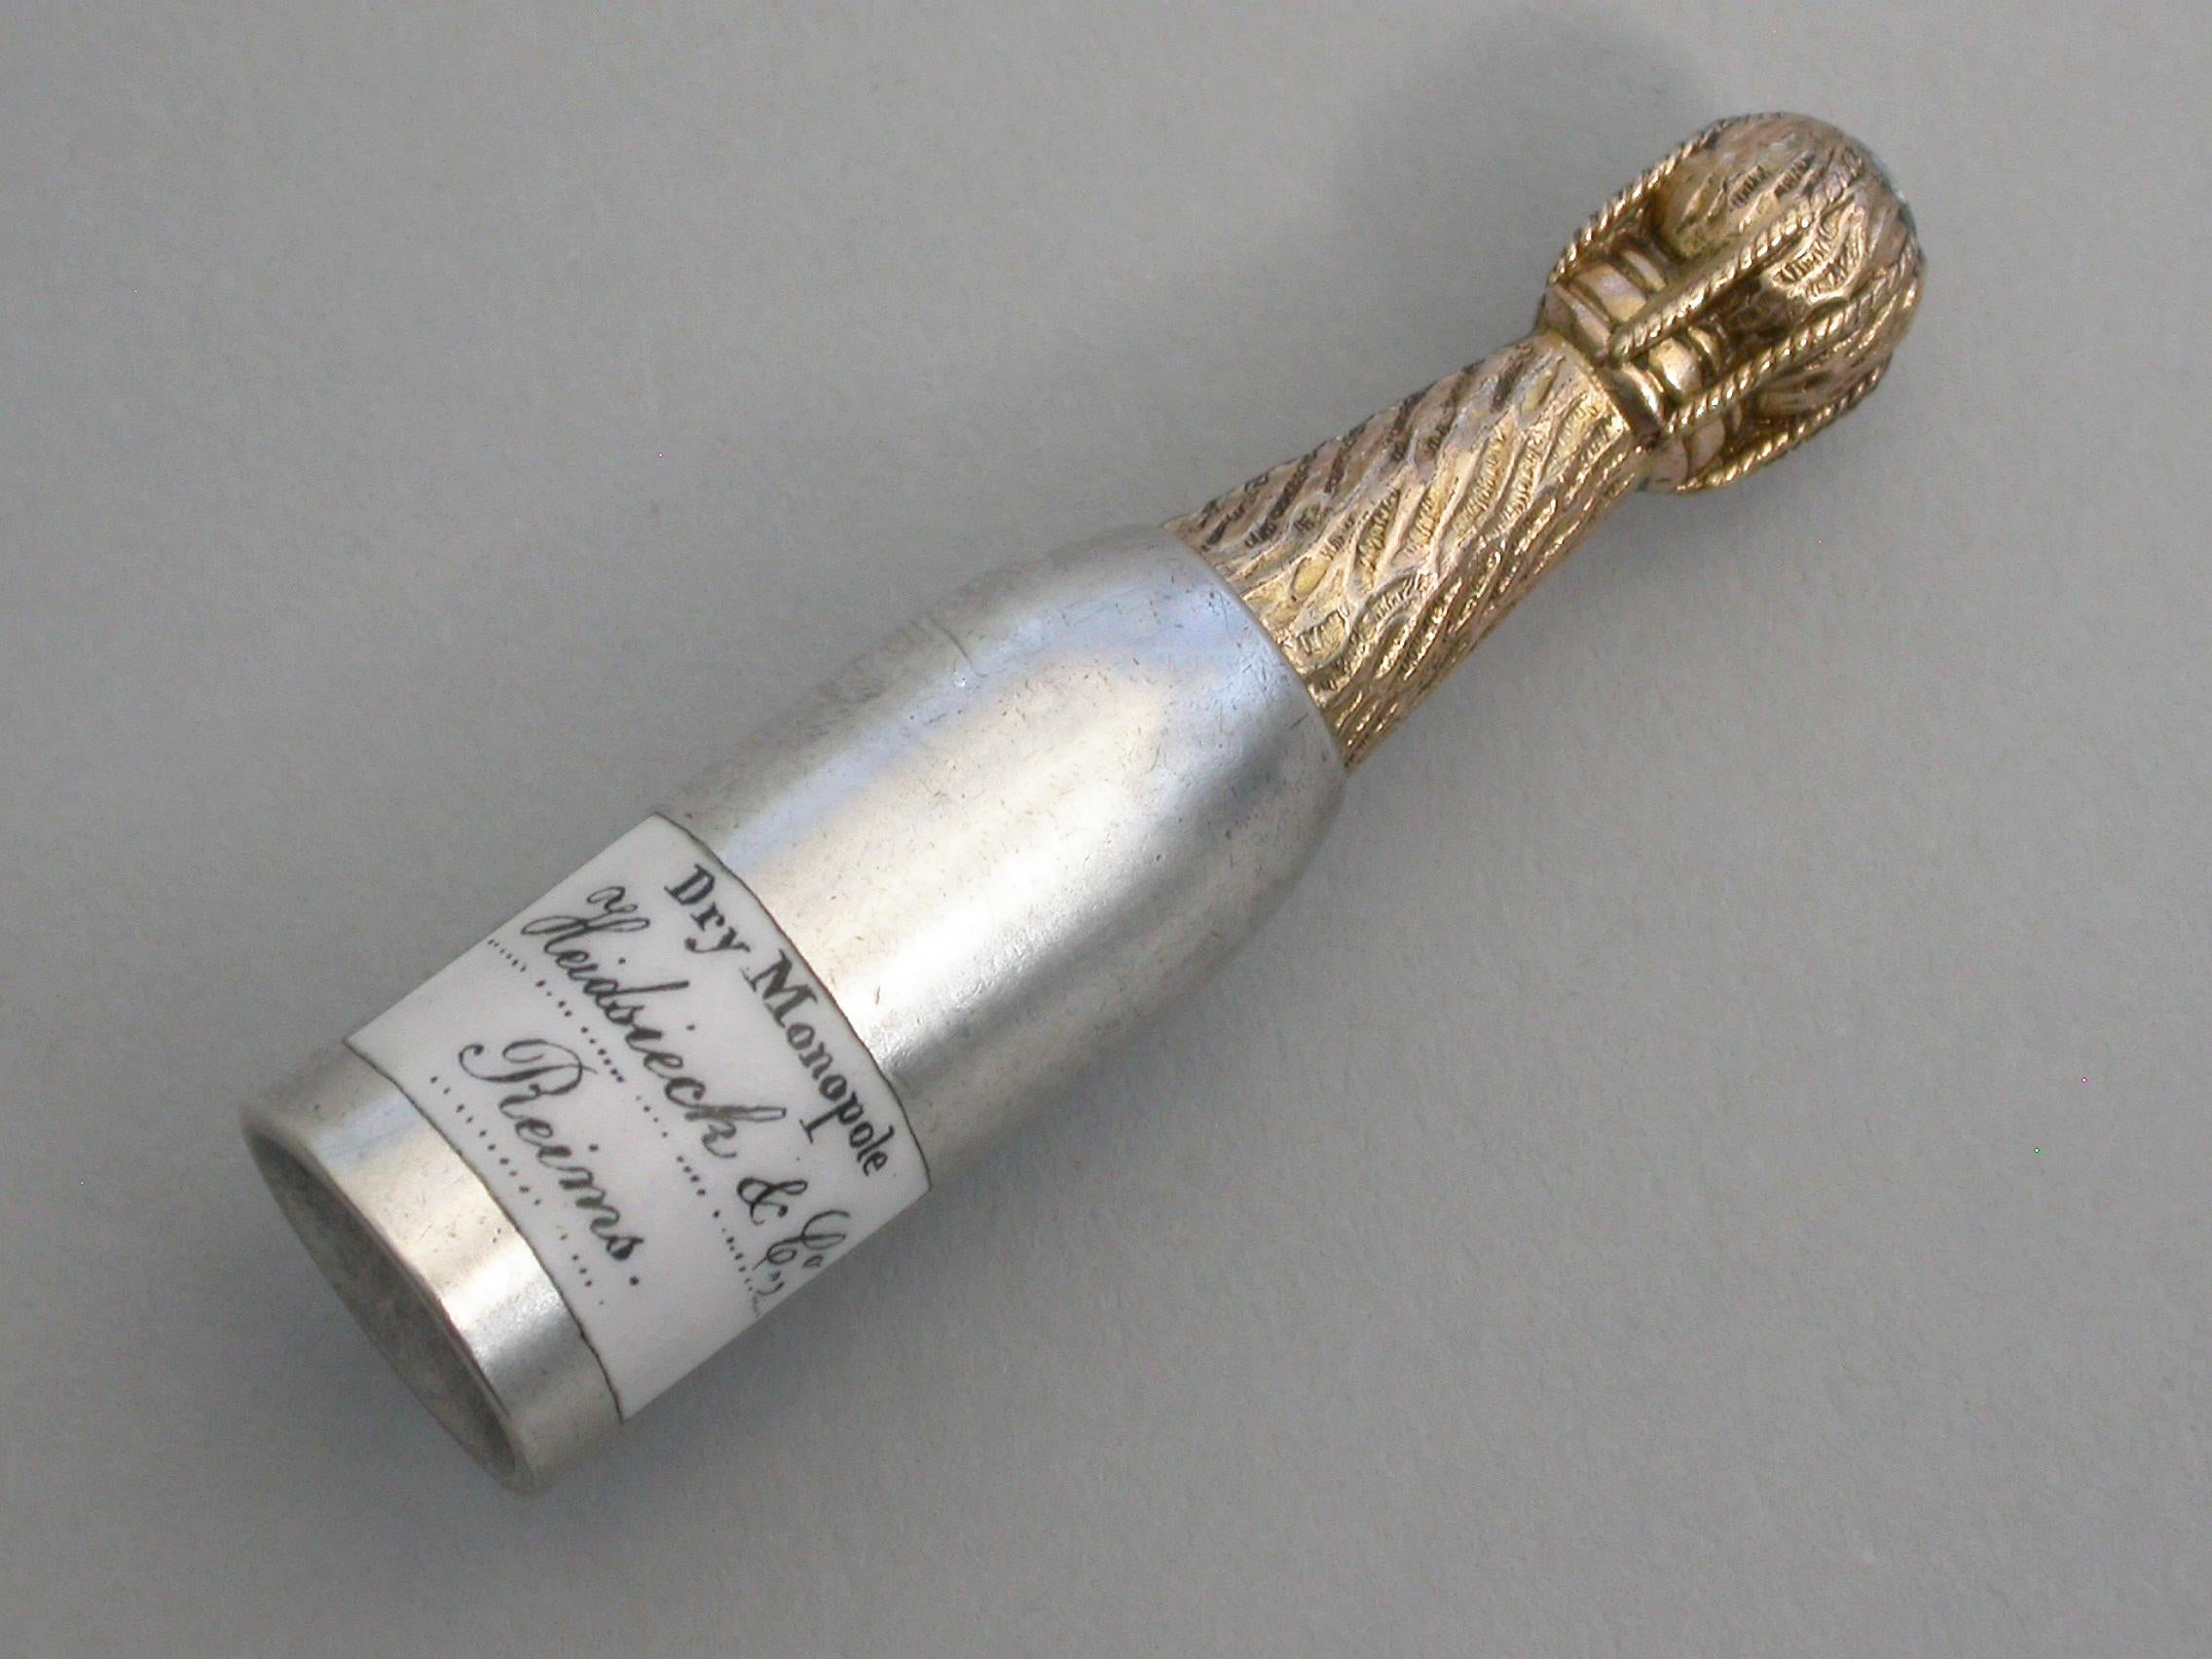 Victorian Novelty Silver & Enamel Champagne Bottle Propelling Pencil, circa 1880 In Good Condition For Sale In Sittingbourne, Kent